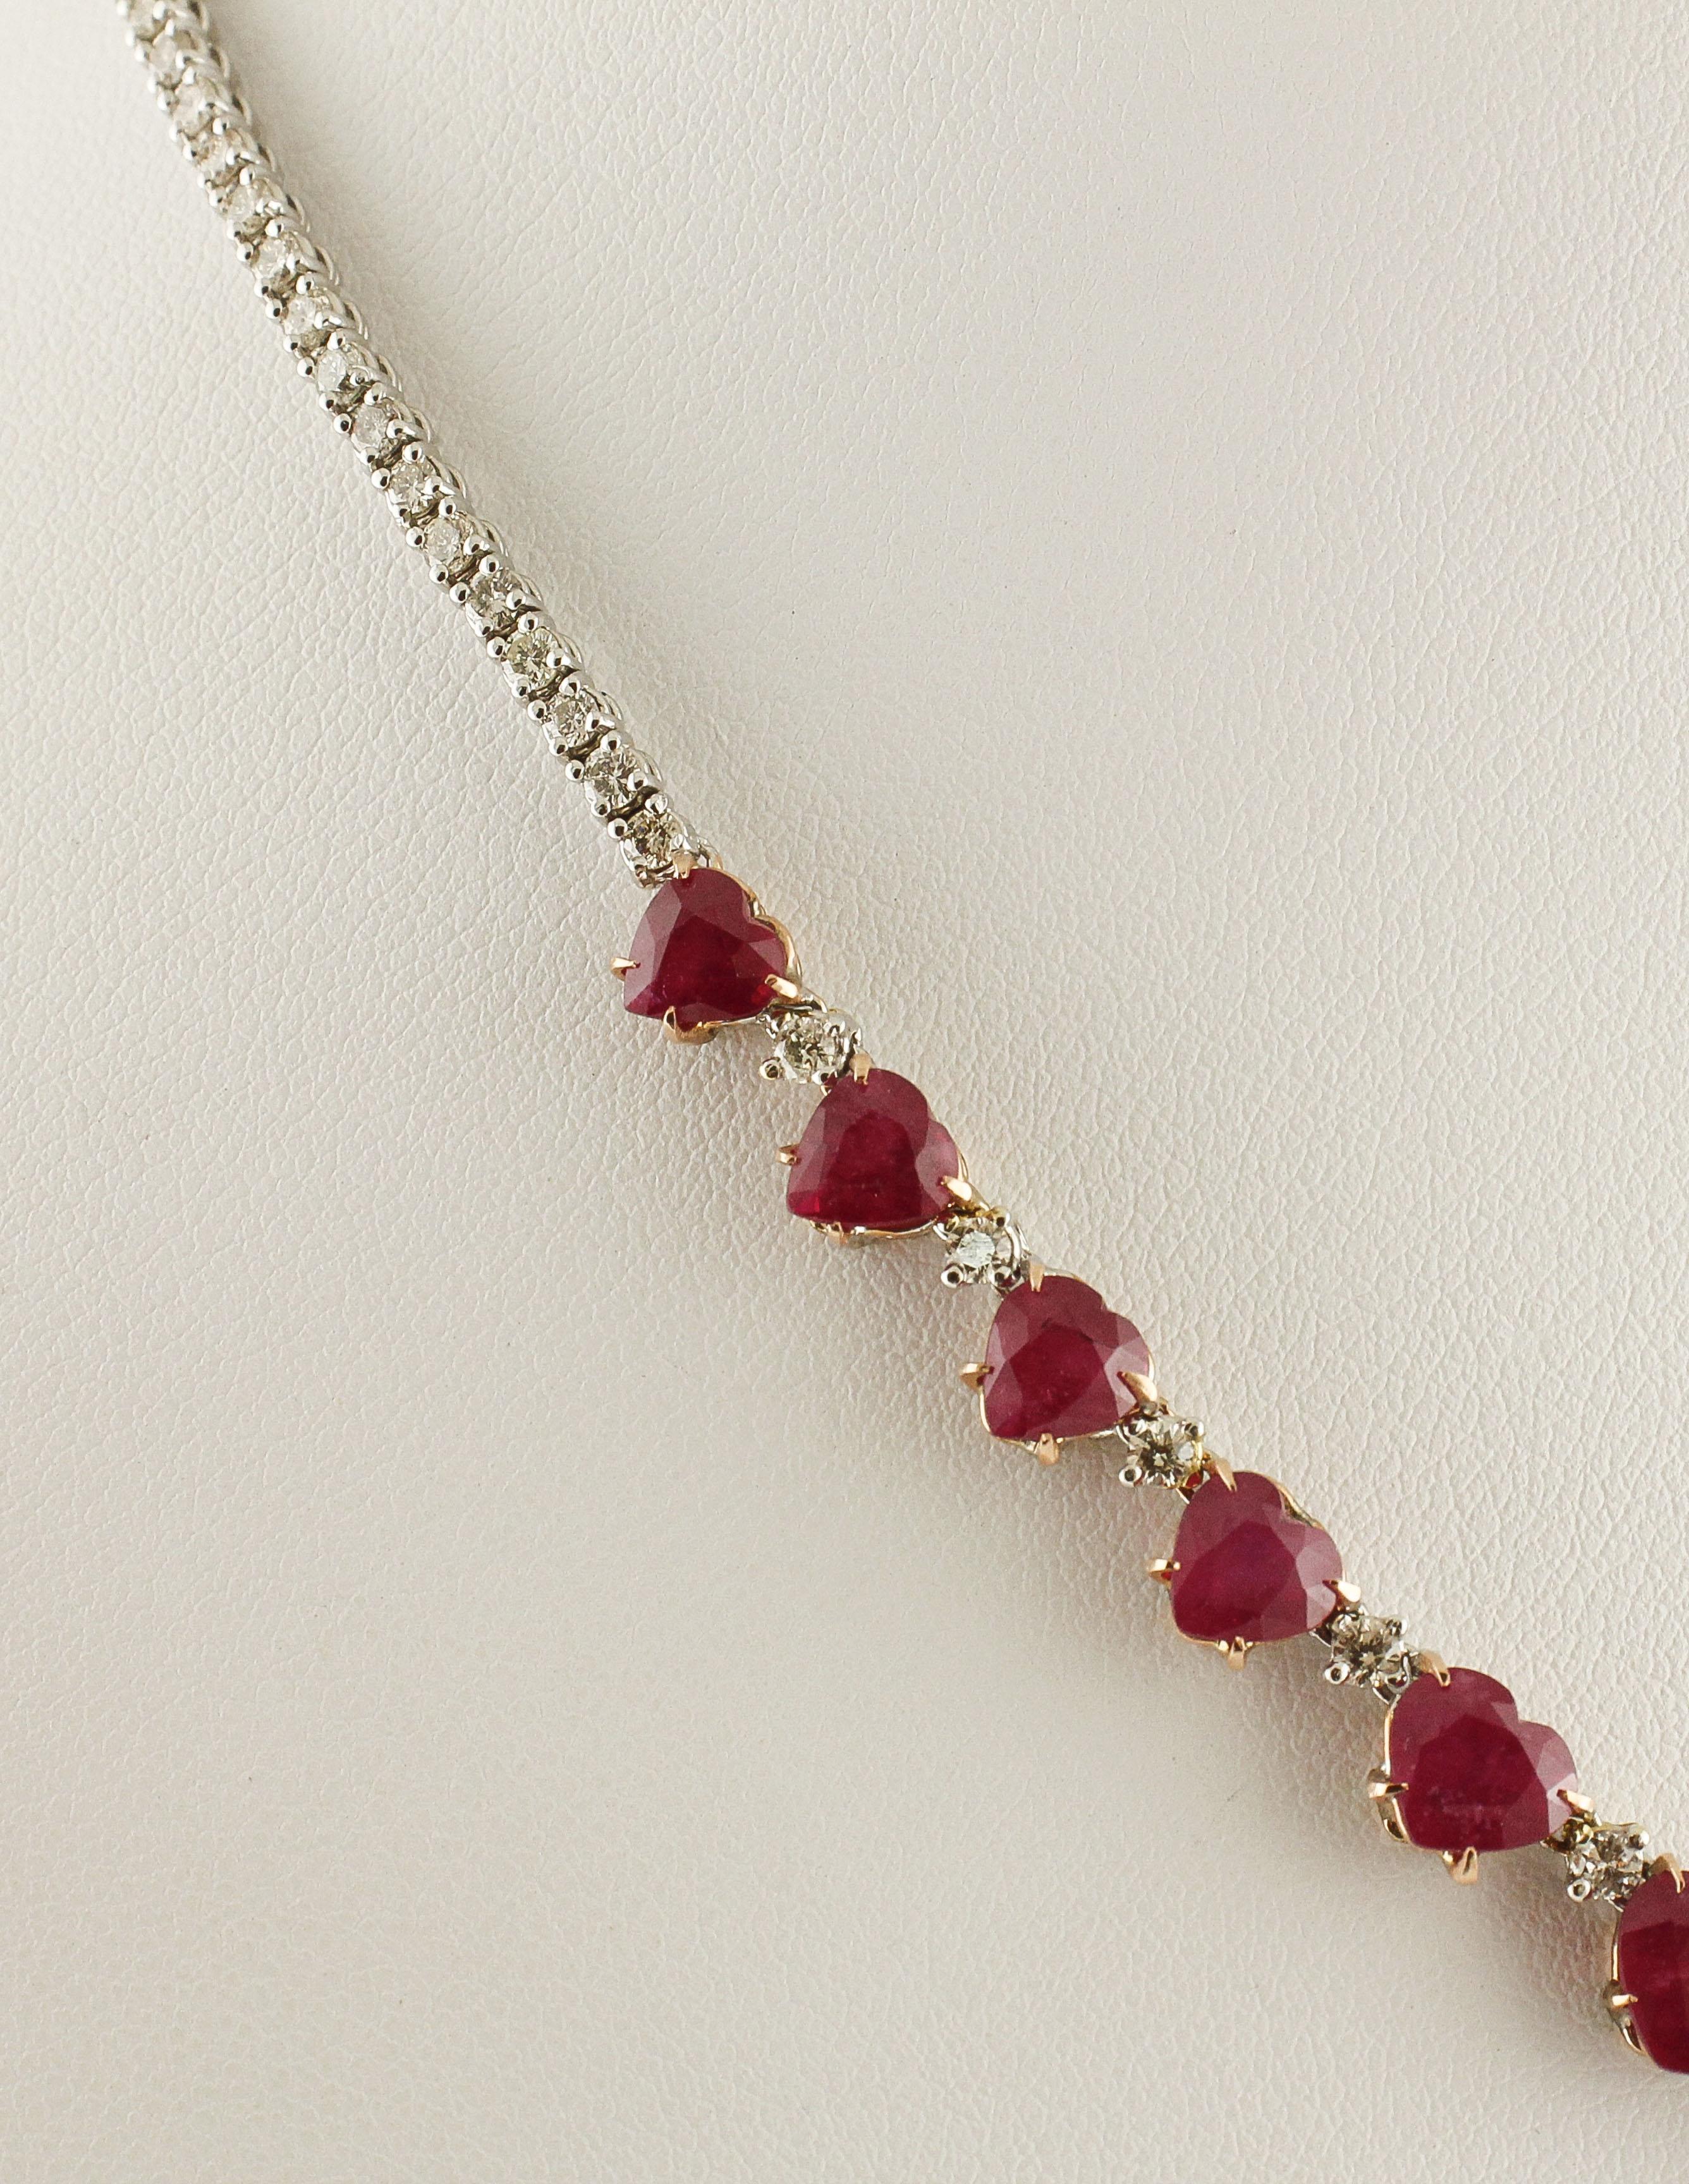 Simple and elegant tennis necklace in 14K white and rose gold with white diamonds on the back and a sequence of heart-shaped rubies of intense color among which there are little white diamonds
Diamonds 3.55 ct 
Rubies 24.26 ct 
Total Weight 23.20 g